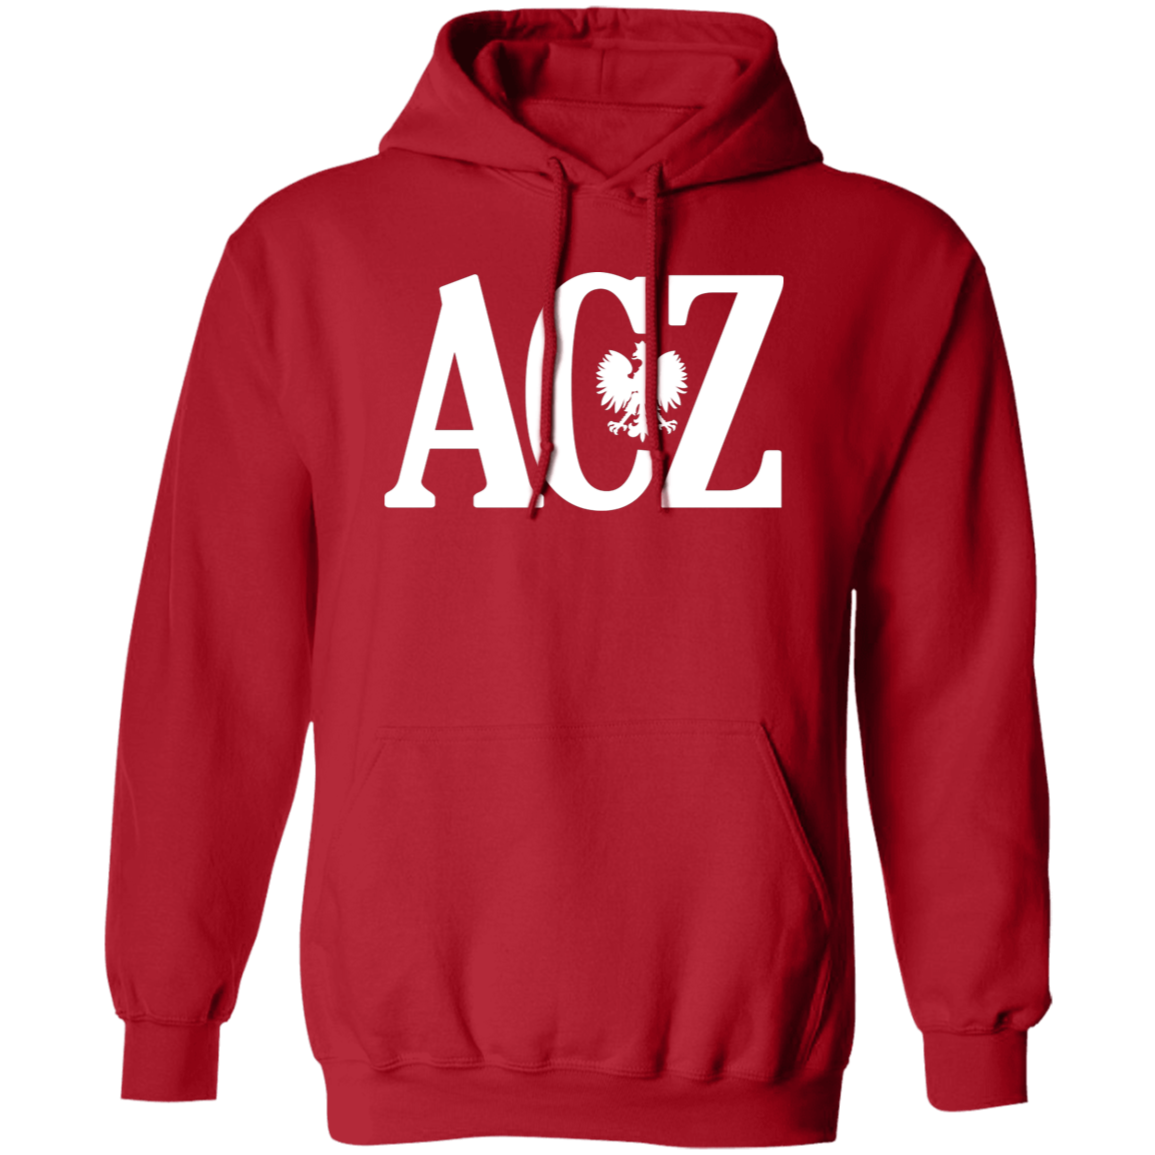 Polish Surname Ending in ACZ Apparel CustomCat G185 Pullover Hoodie Red S